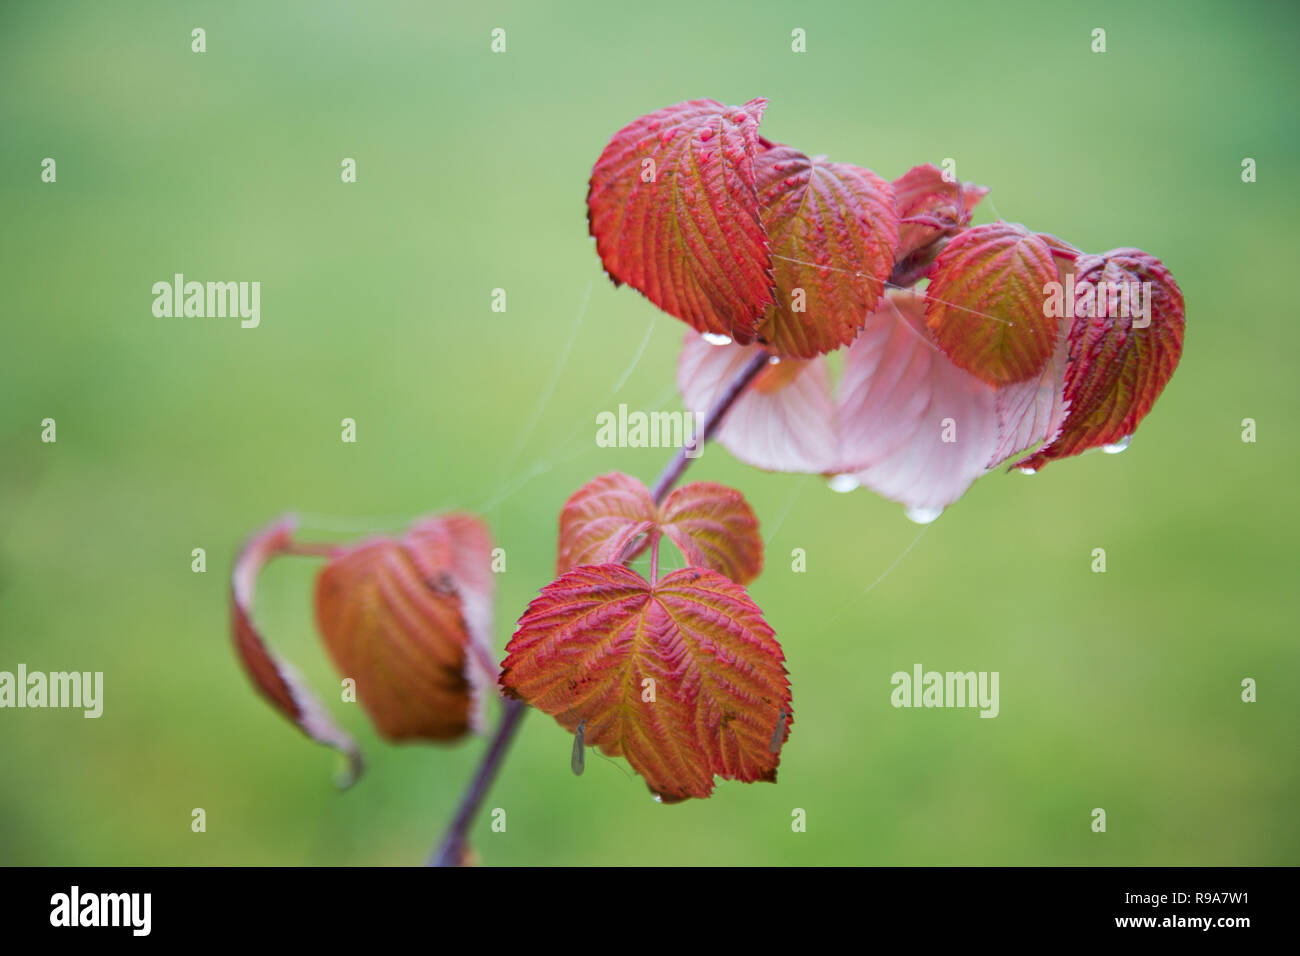 red raspberry leaves with water drops on a blurred background Stock Photo